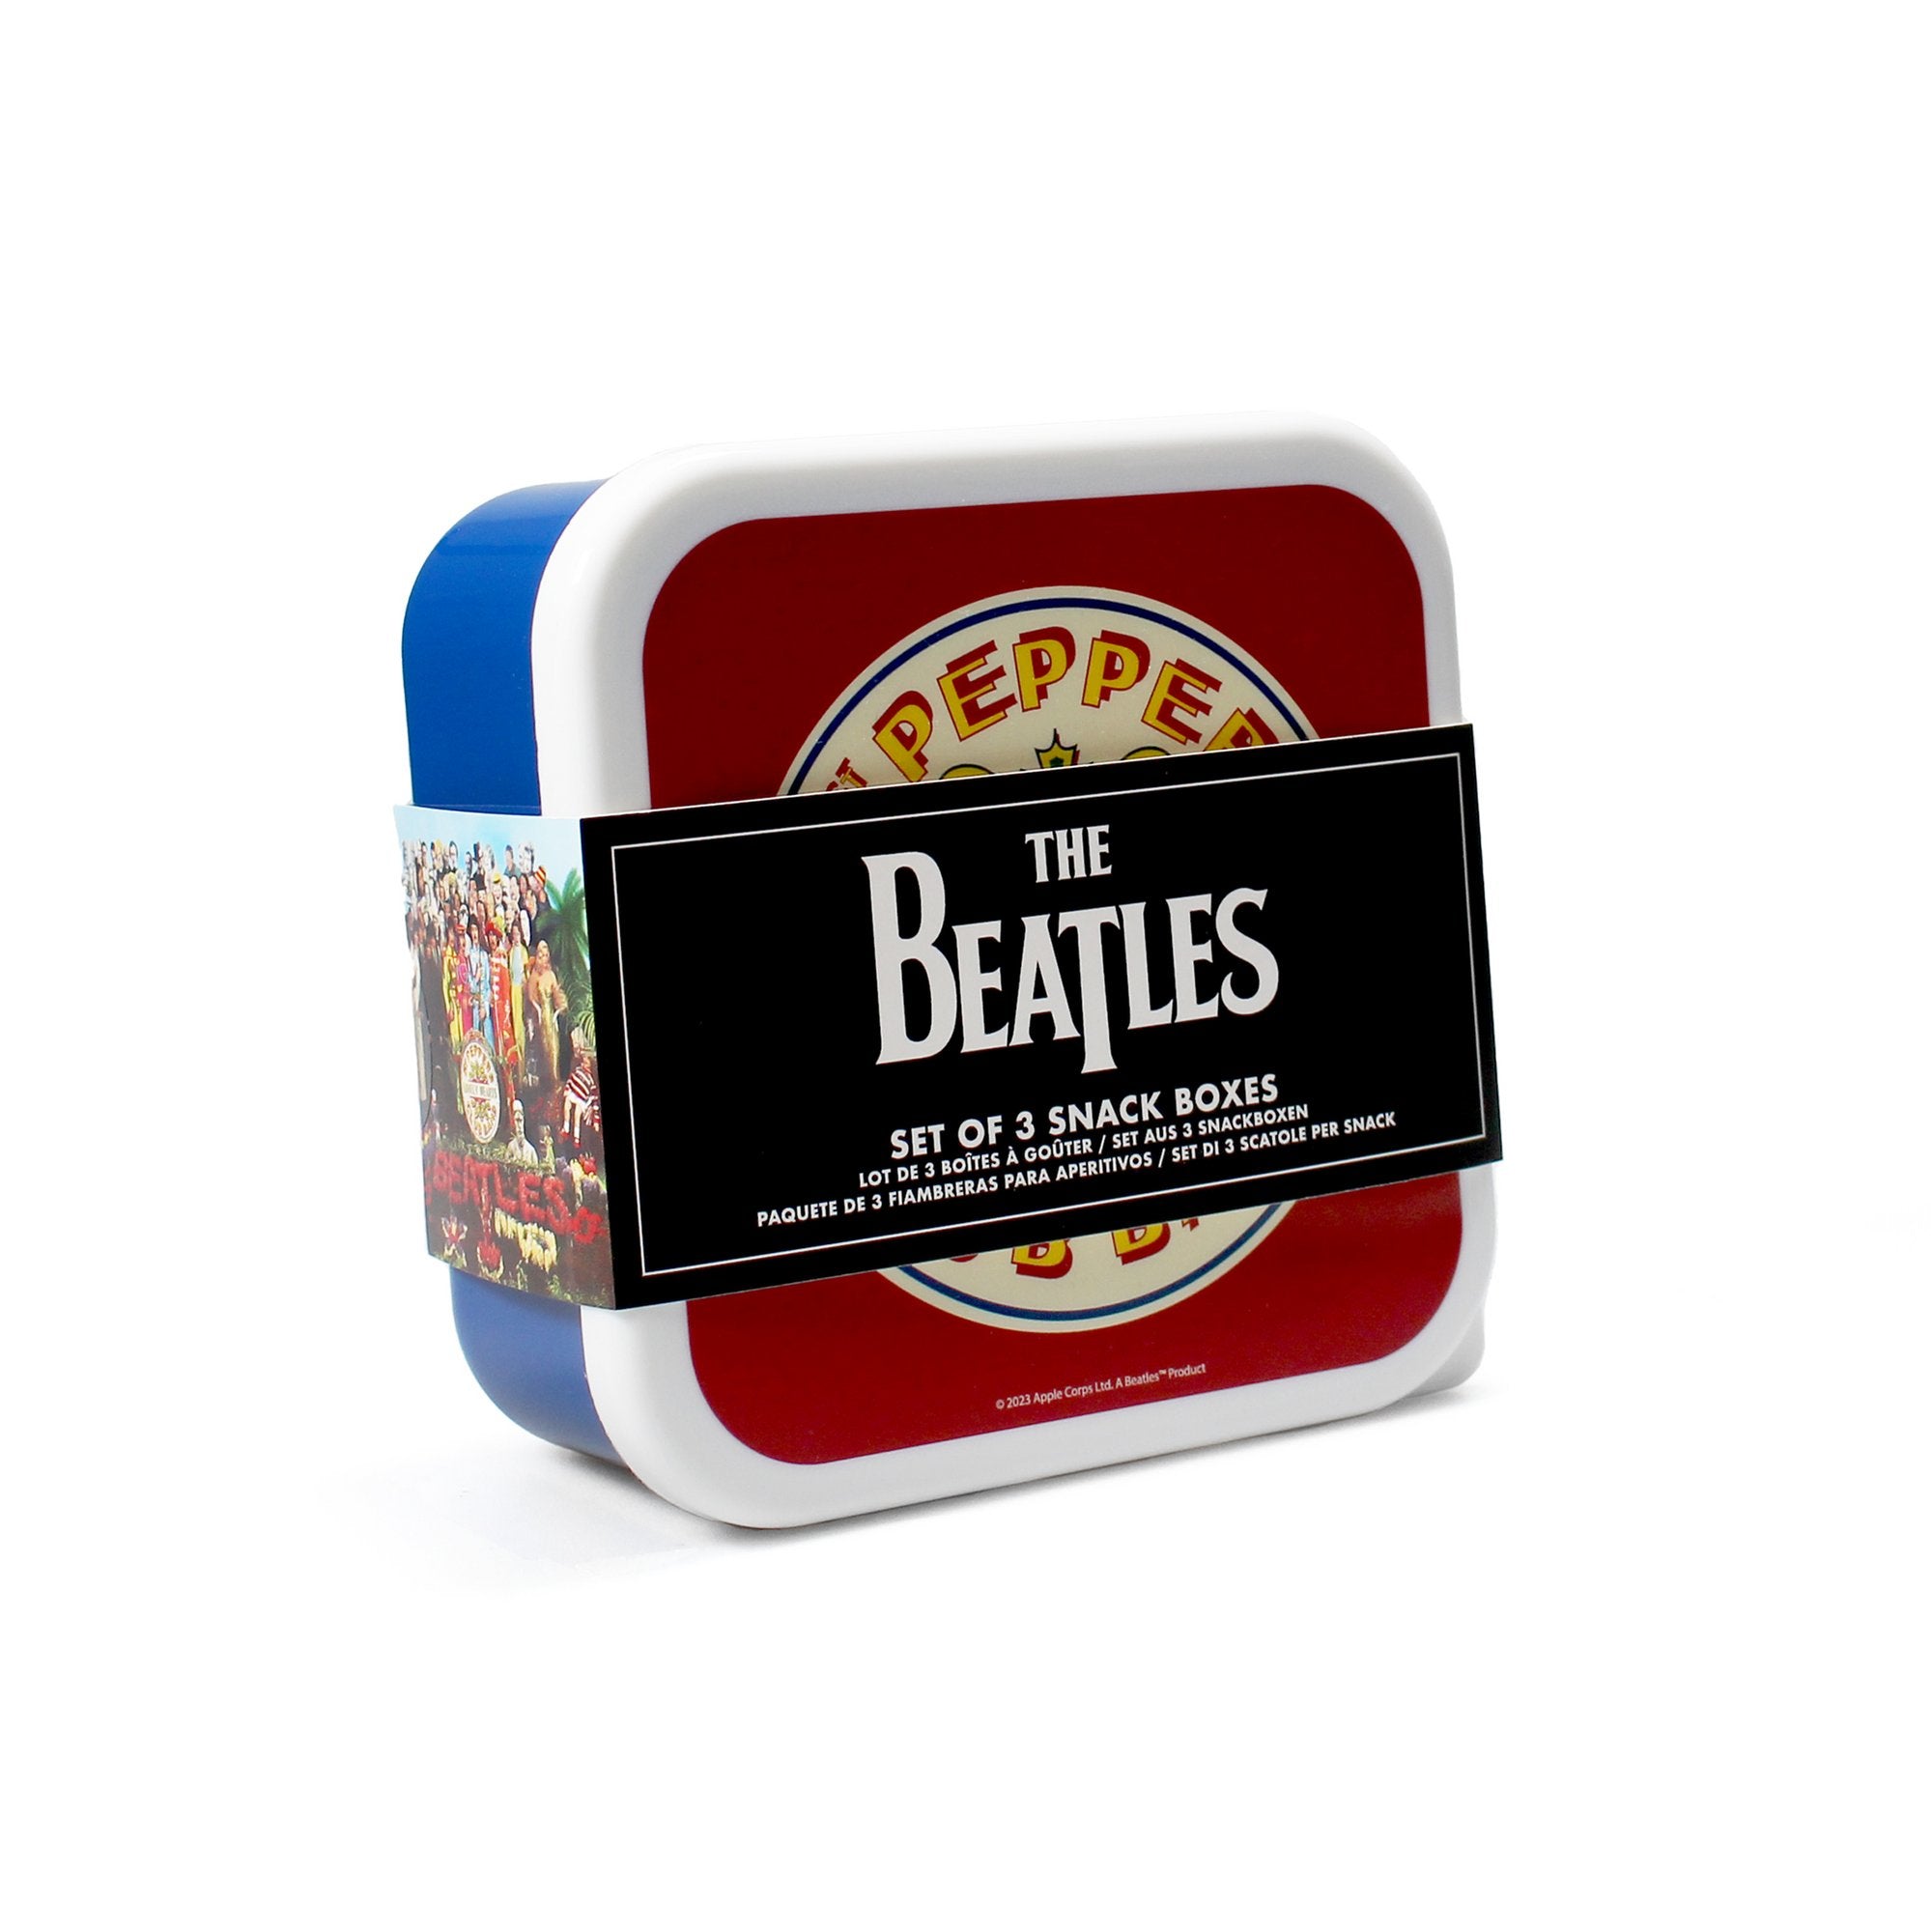 Snack Boxes Set of 3 - The Beatles (Sgt. Pepper)